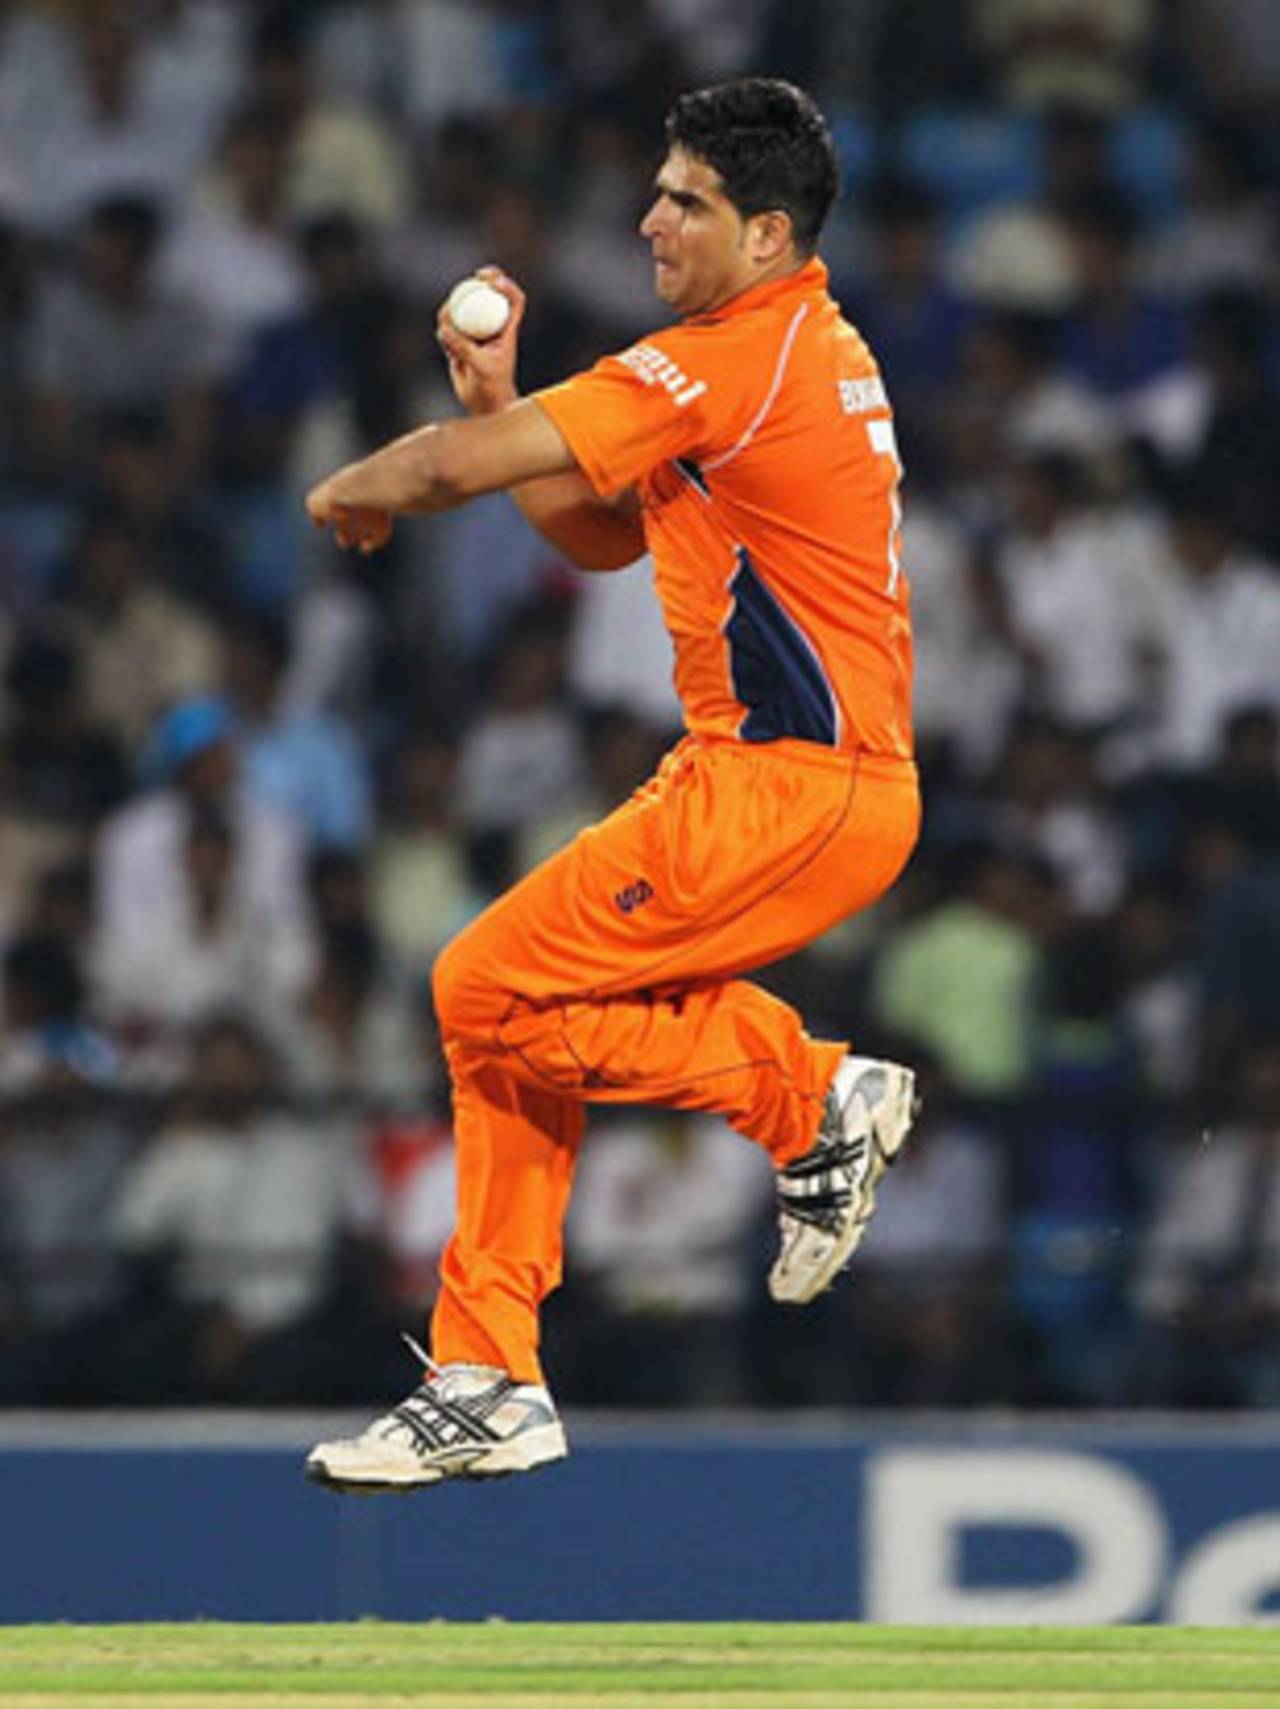 Mudassar Bukhari in his delivery stride, England v Netherlands, Group B, World Cup, Nagpur, February 22, 2011